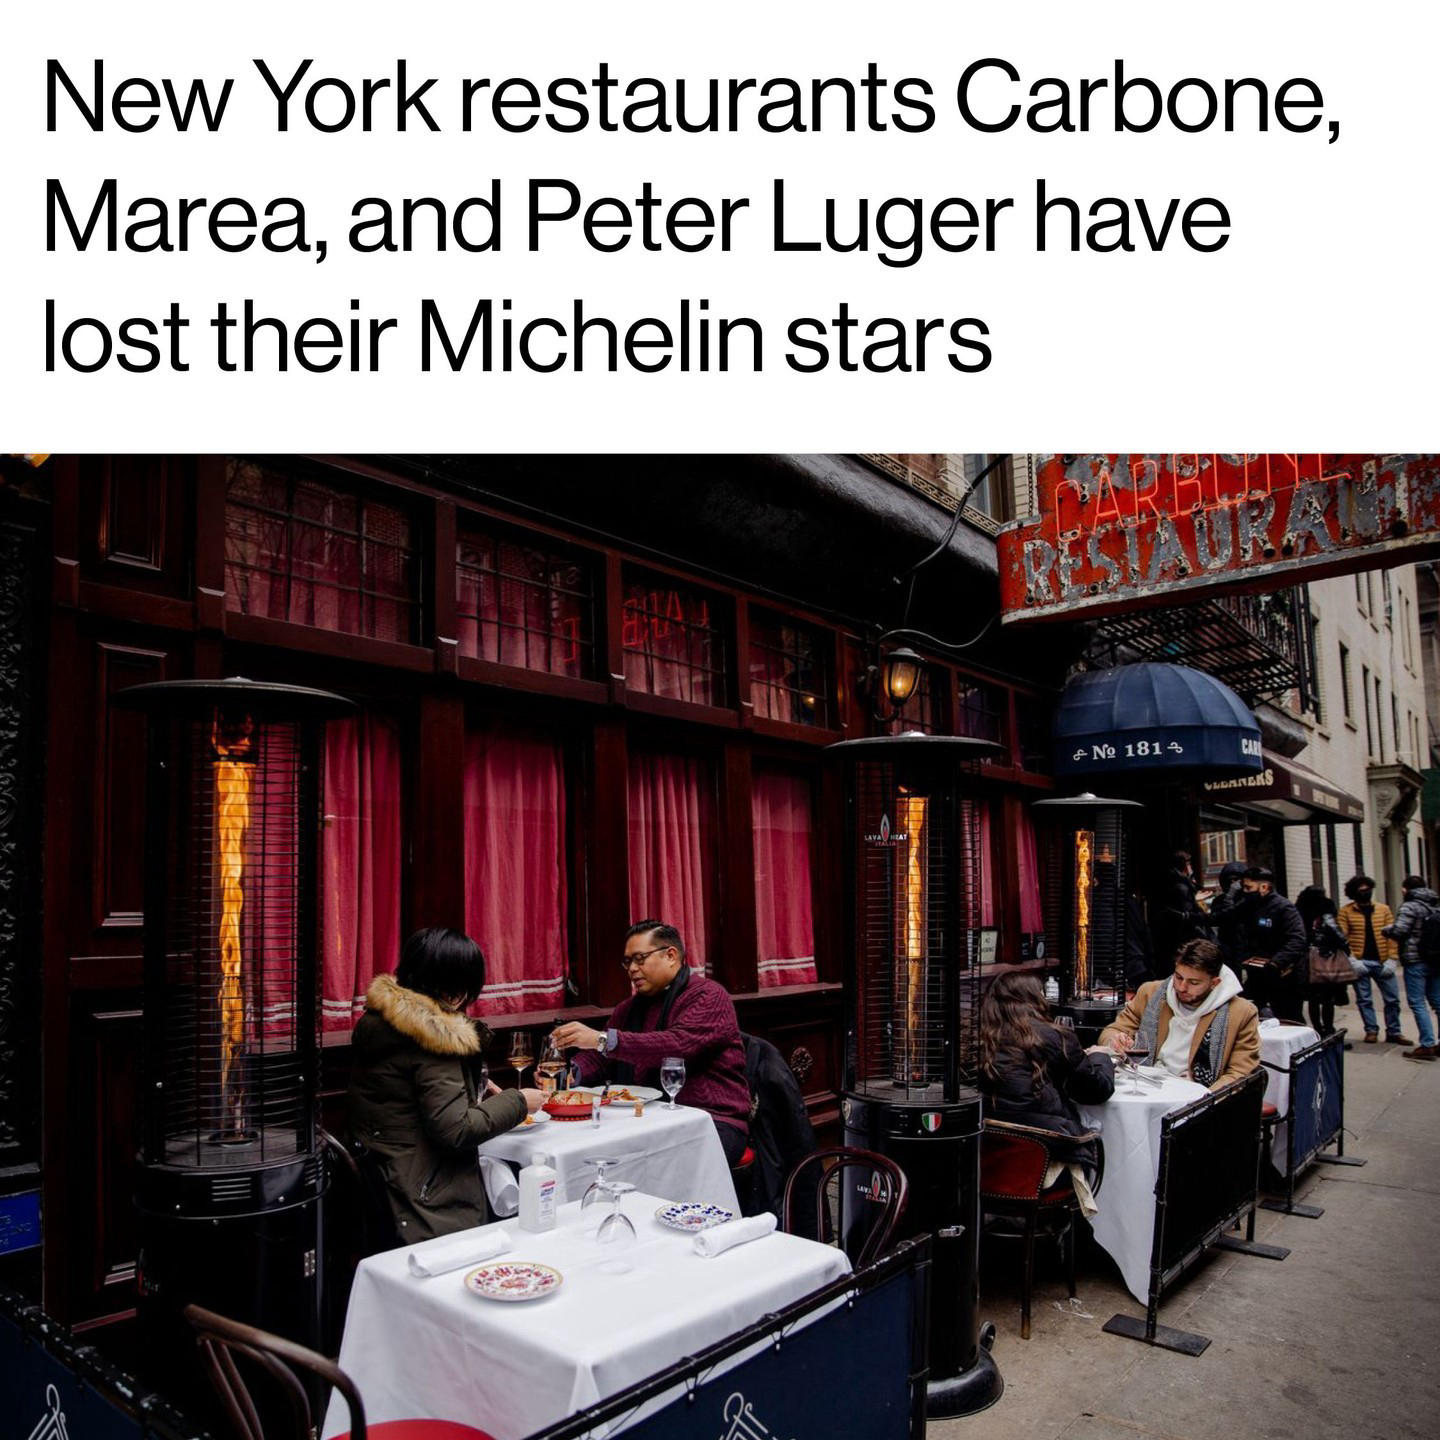 Bloomberg Businessweek - ● There are now 73 starred dining rooms in New York